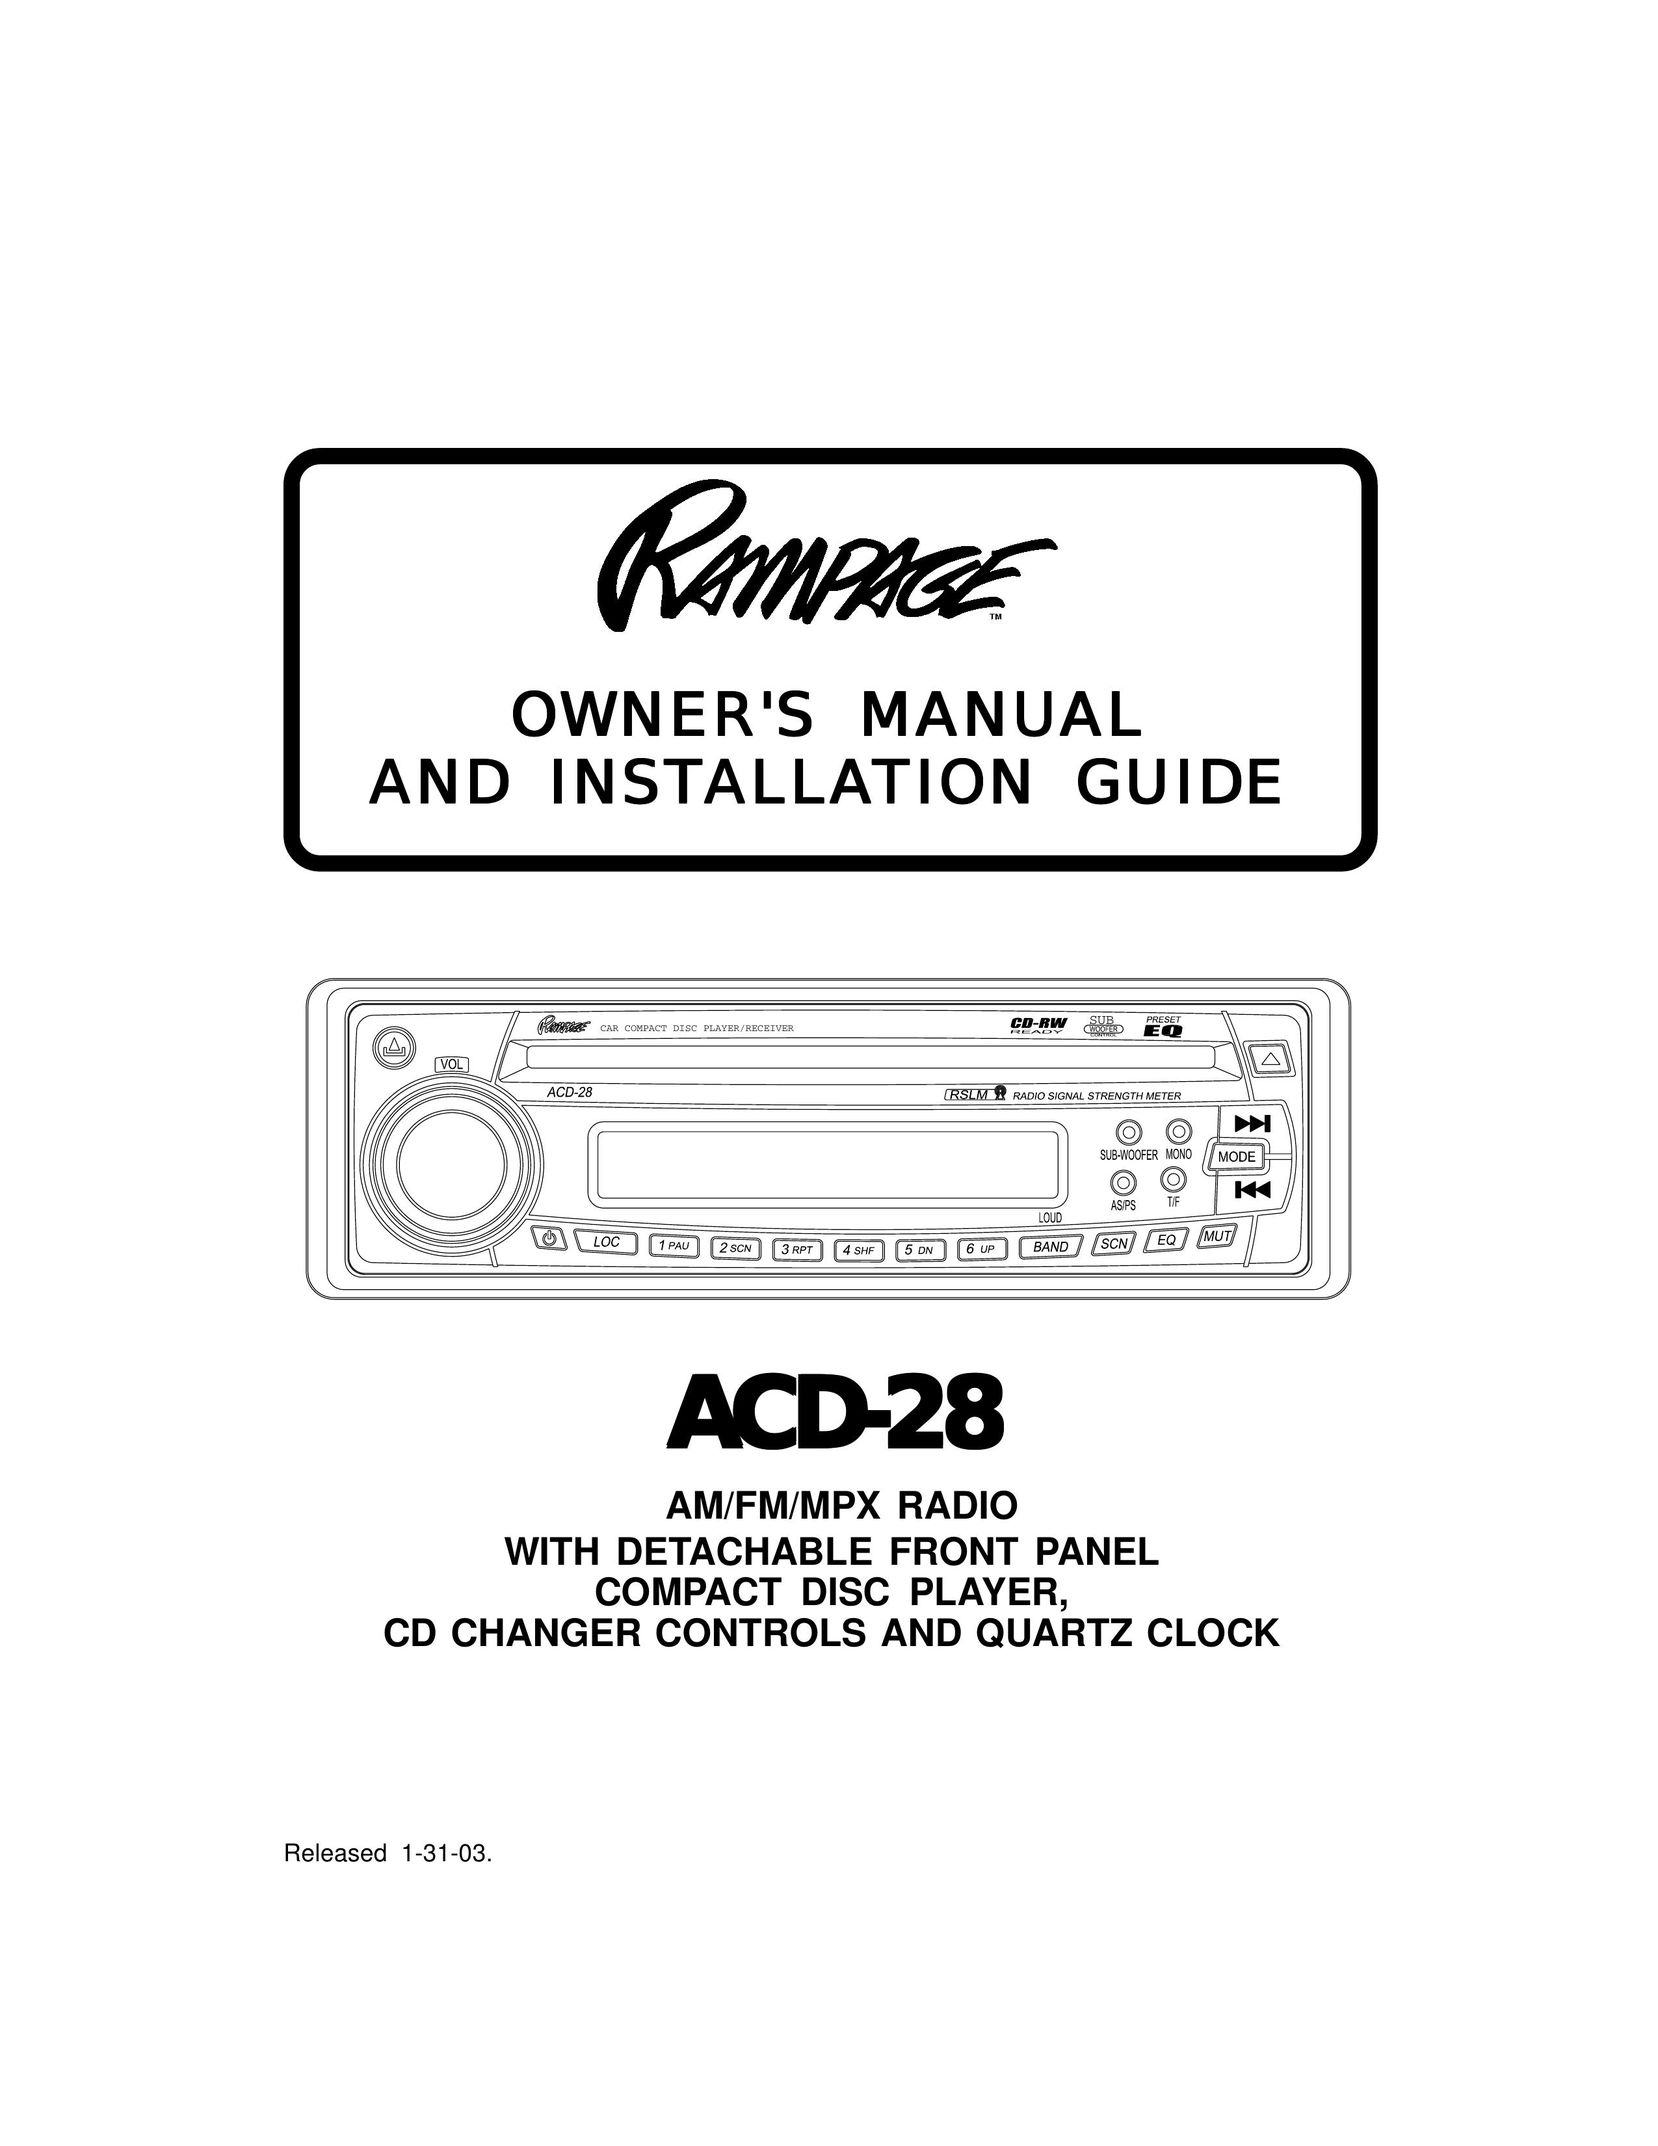 Audiovox ACD-28 Car Stereo System User Manual